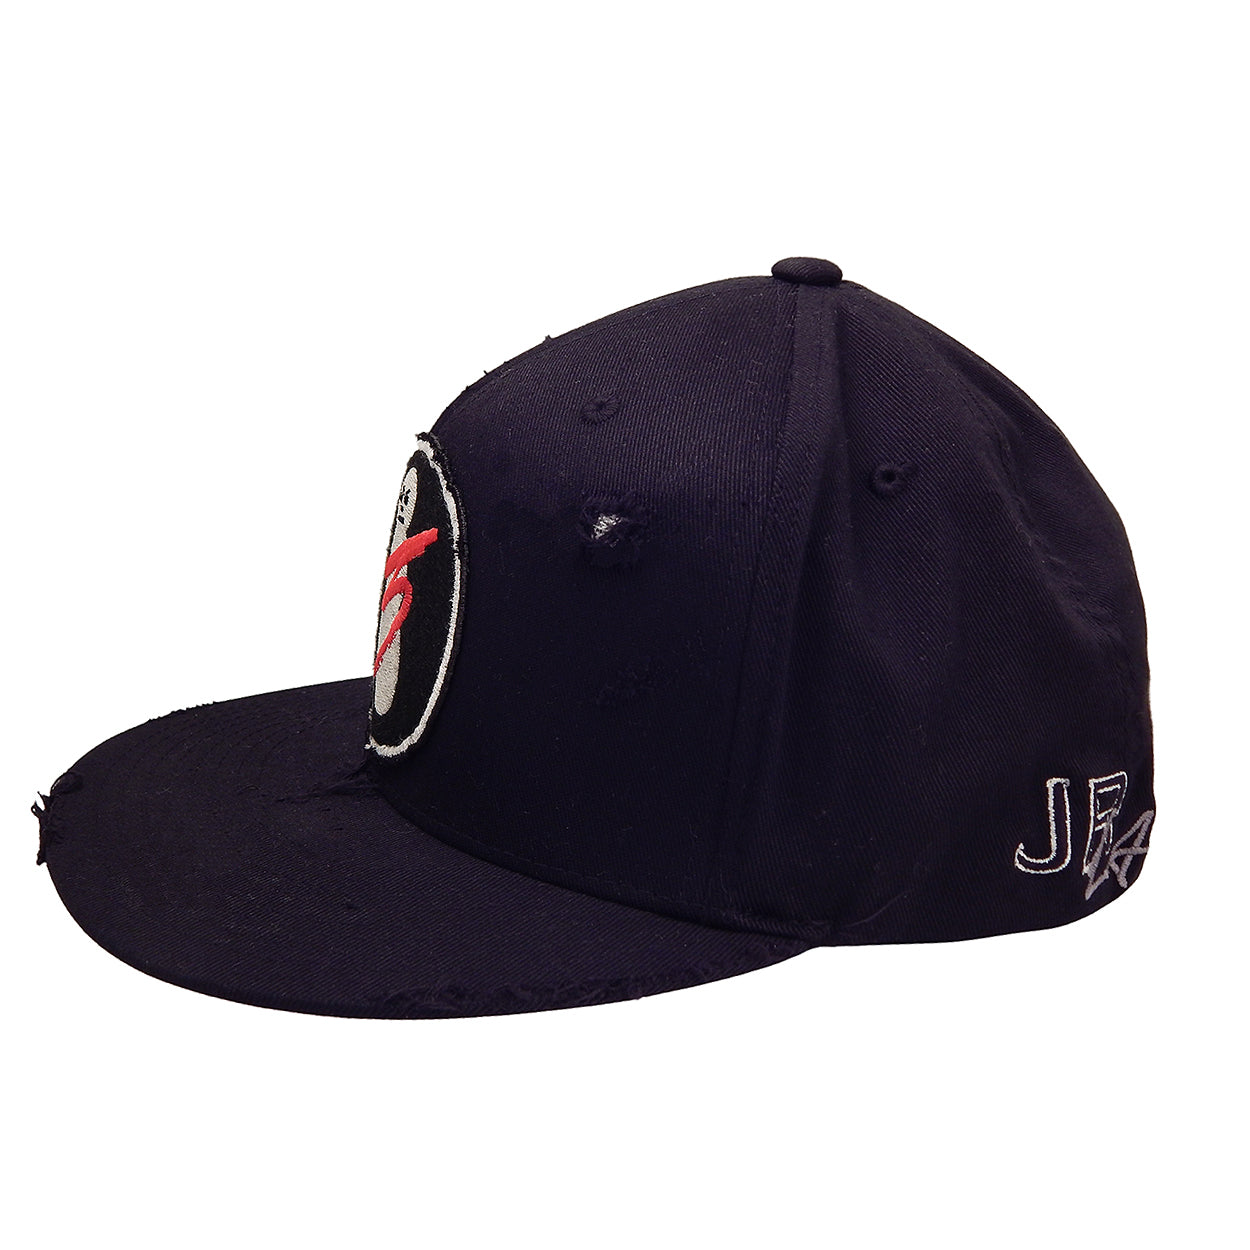 J. Ransom Collection - &quot;CROSSED OUT&quot; Flat Billed Hat in BLACK